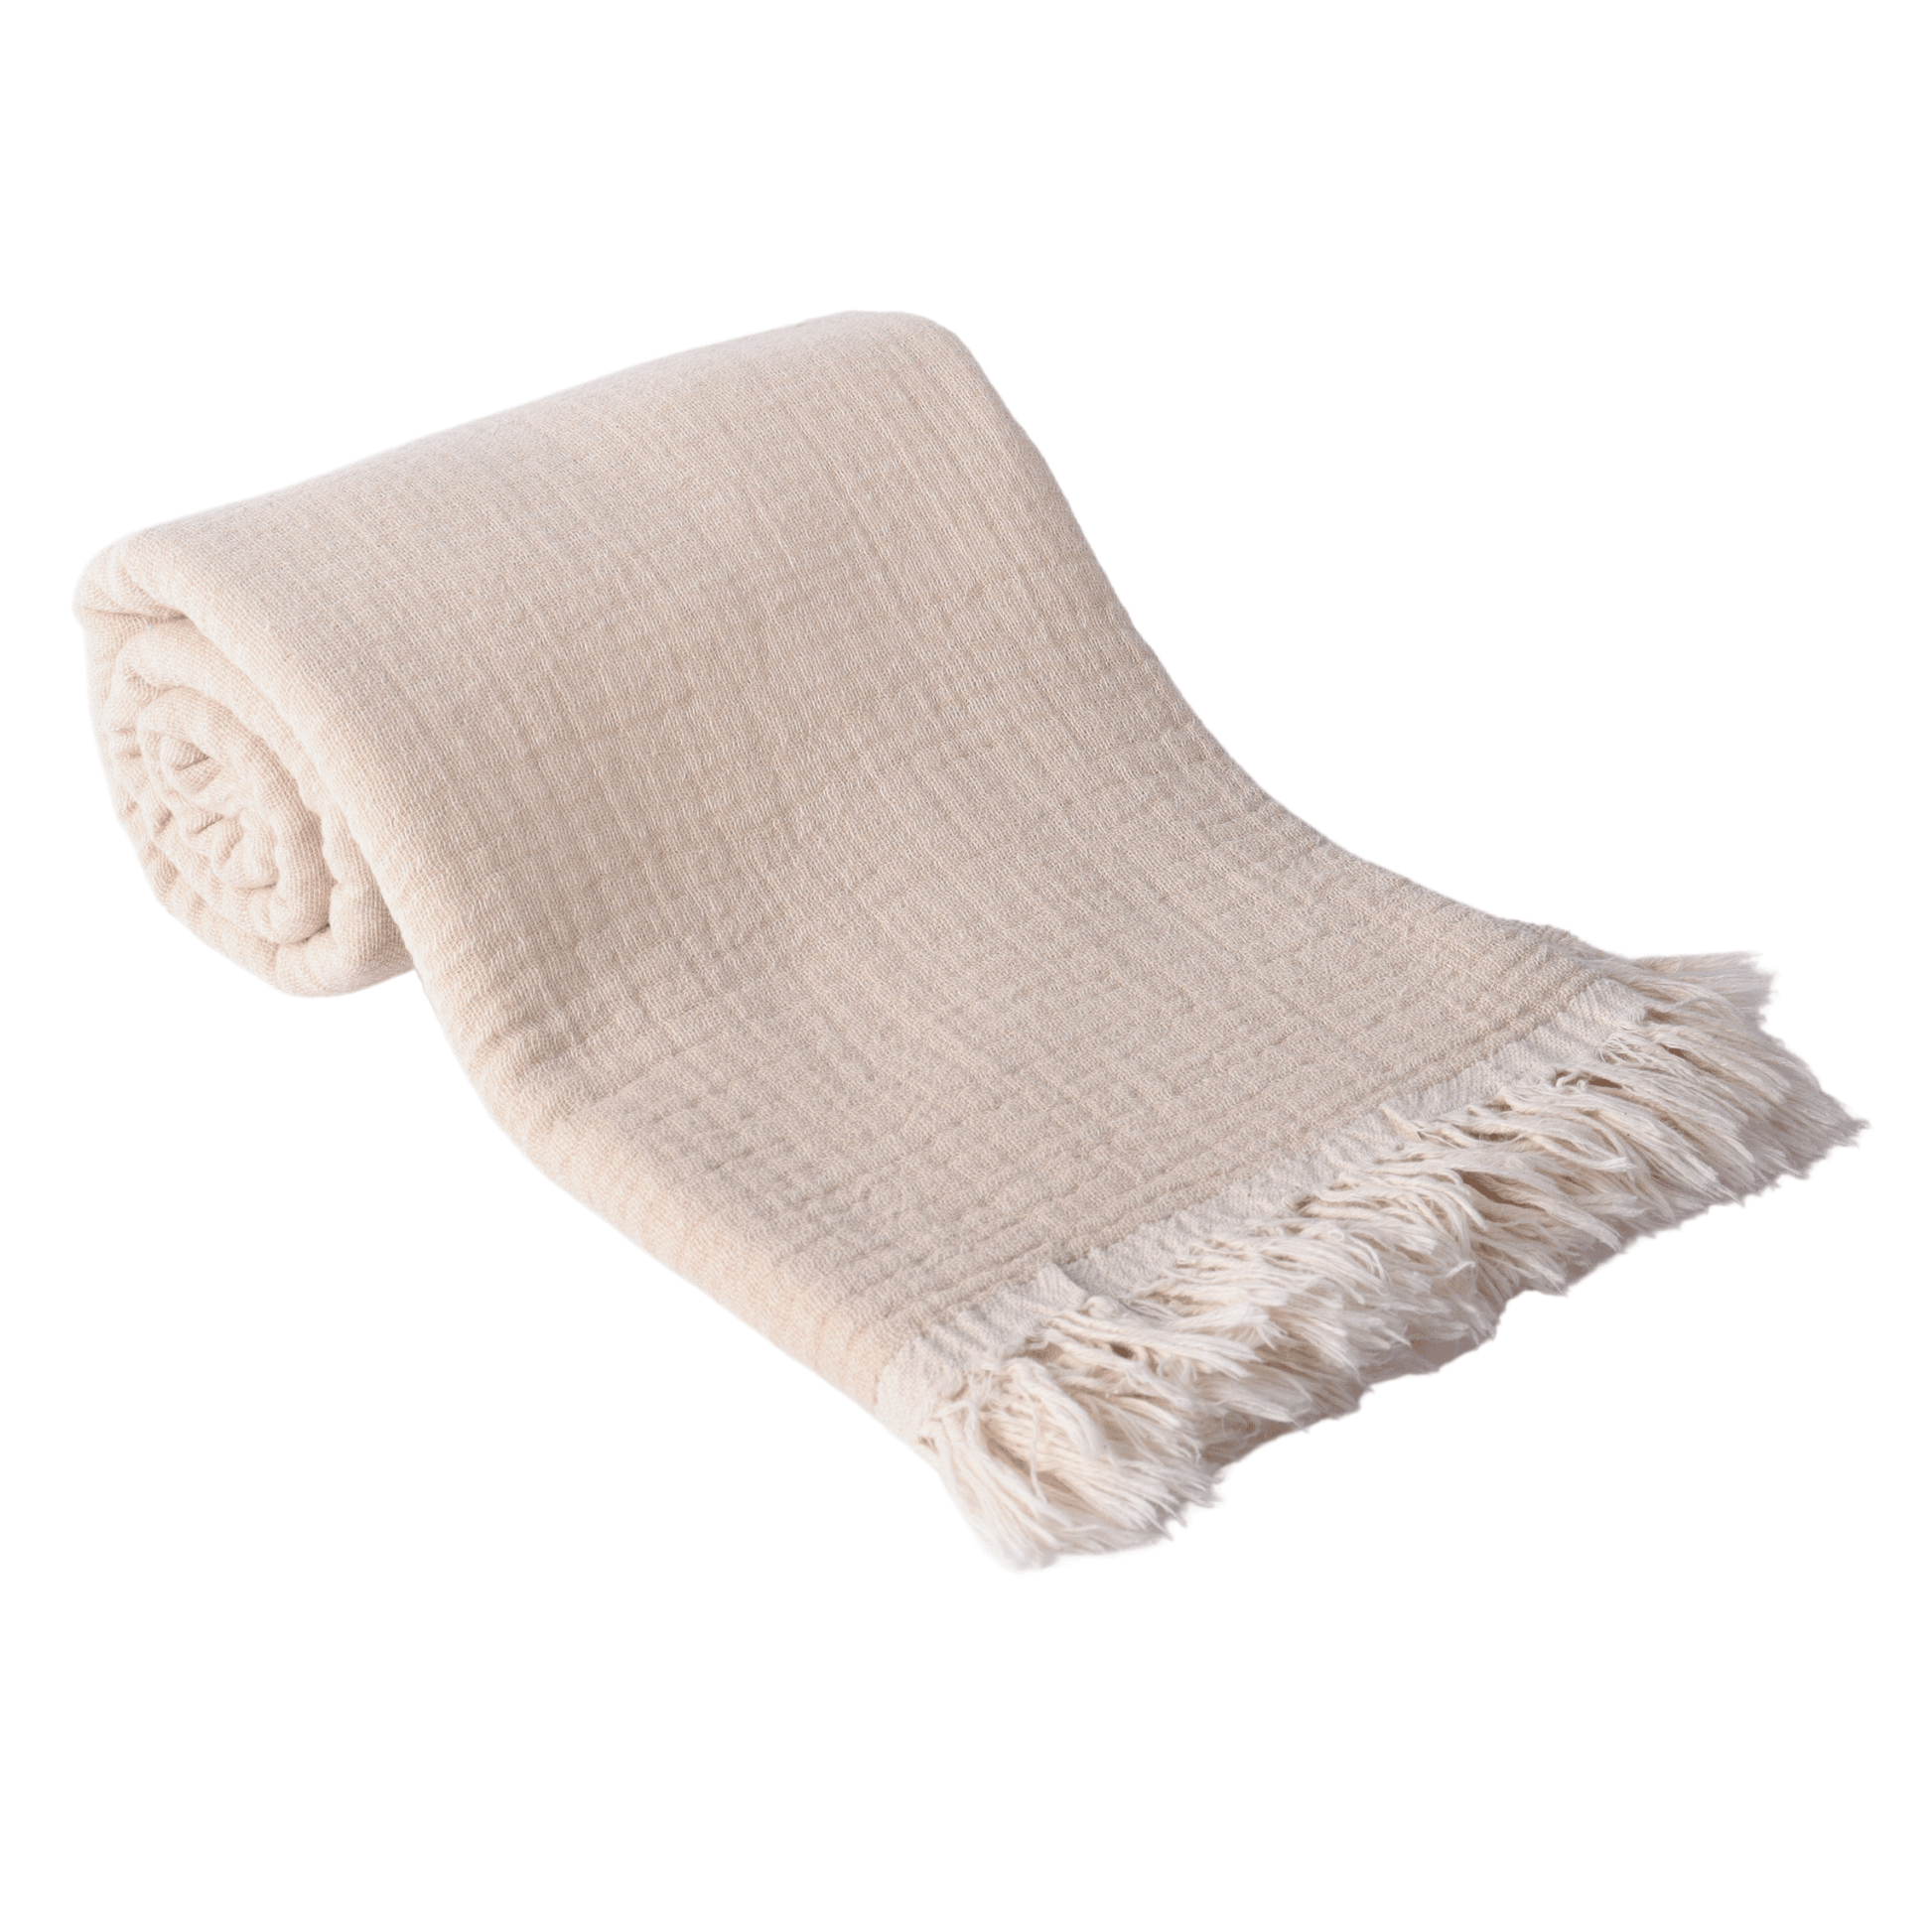 Muslin Towels for Adults natural 3